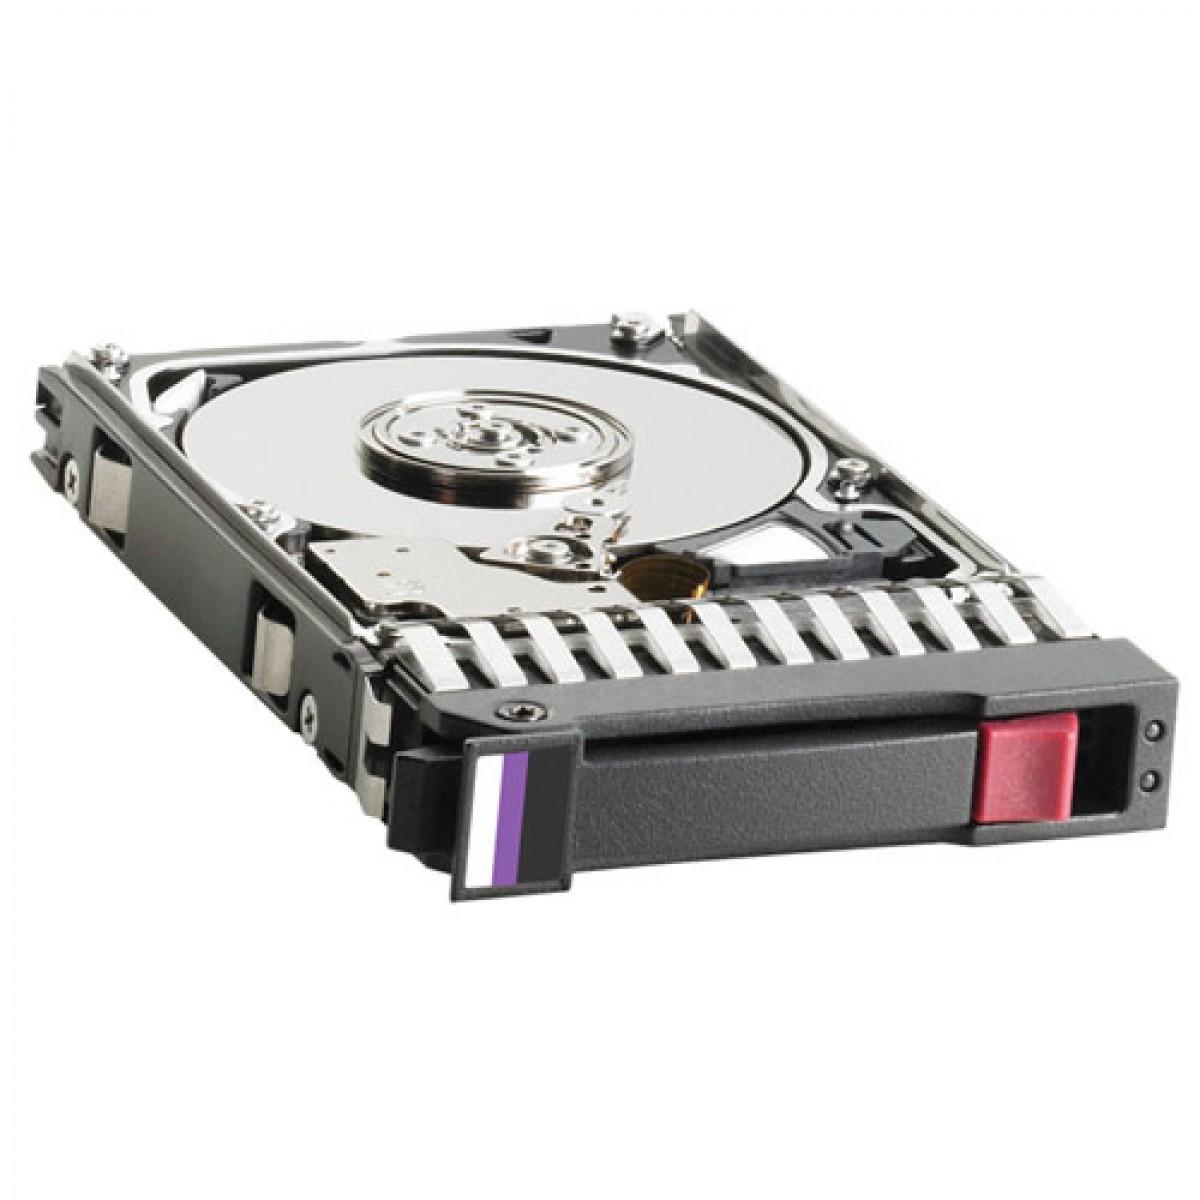 Hp – 1468gb 10000rpm Ultra-320 Scsi Hot Plug 35inch Hard Disk Drive With Tray (a9898-69001)